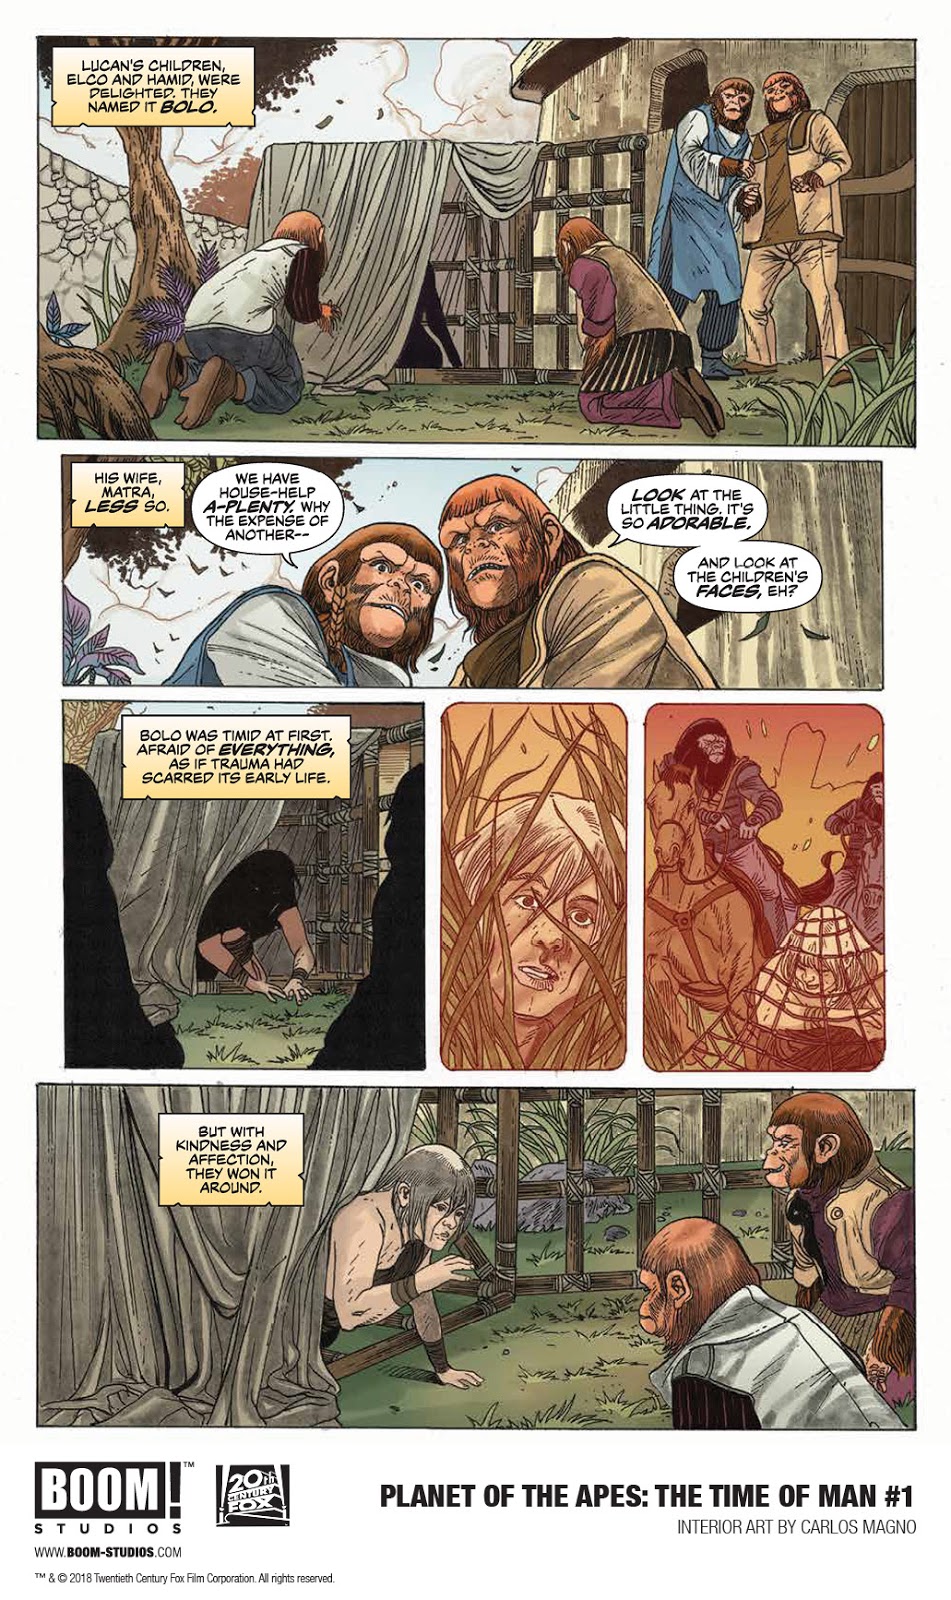 PLANET OF THE APES: THE TIME OF MAN #1